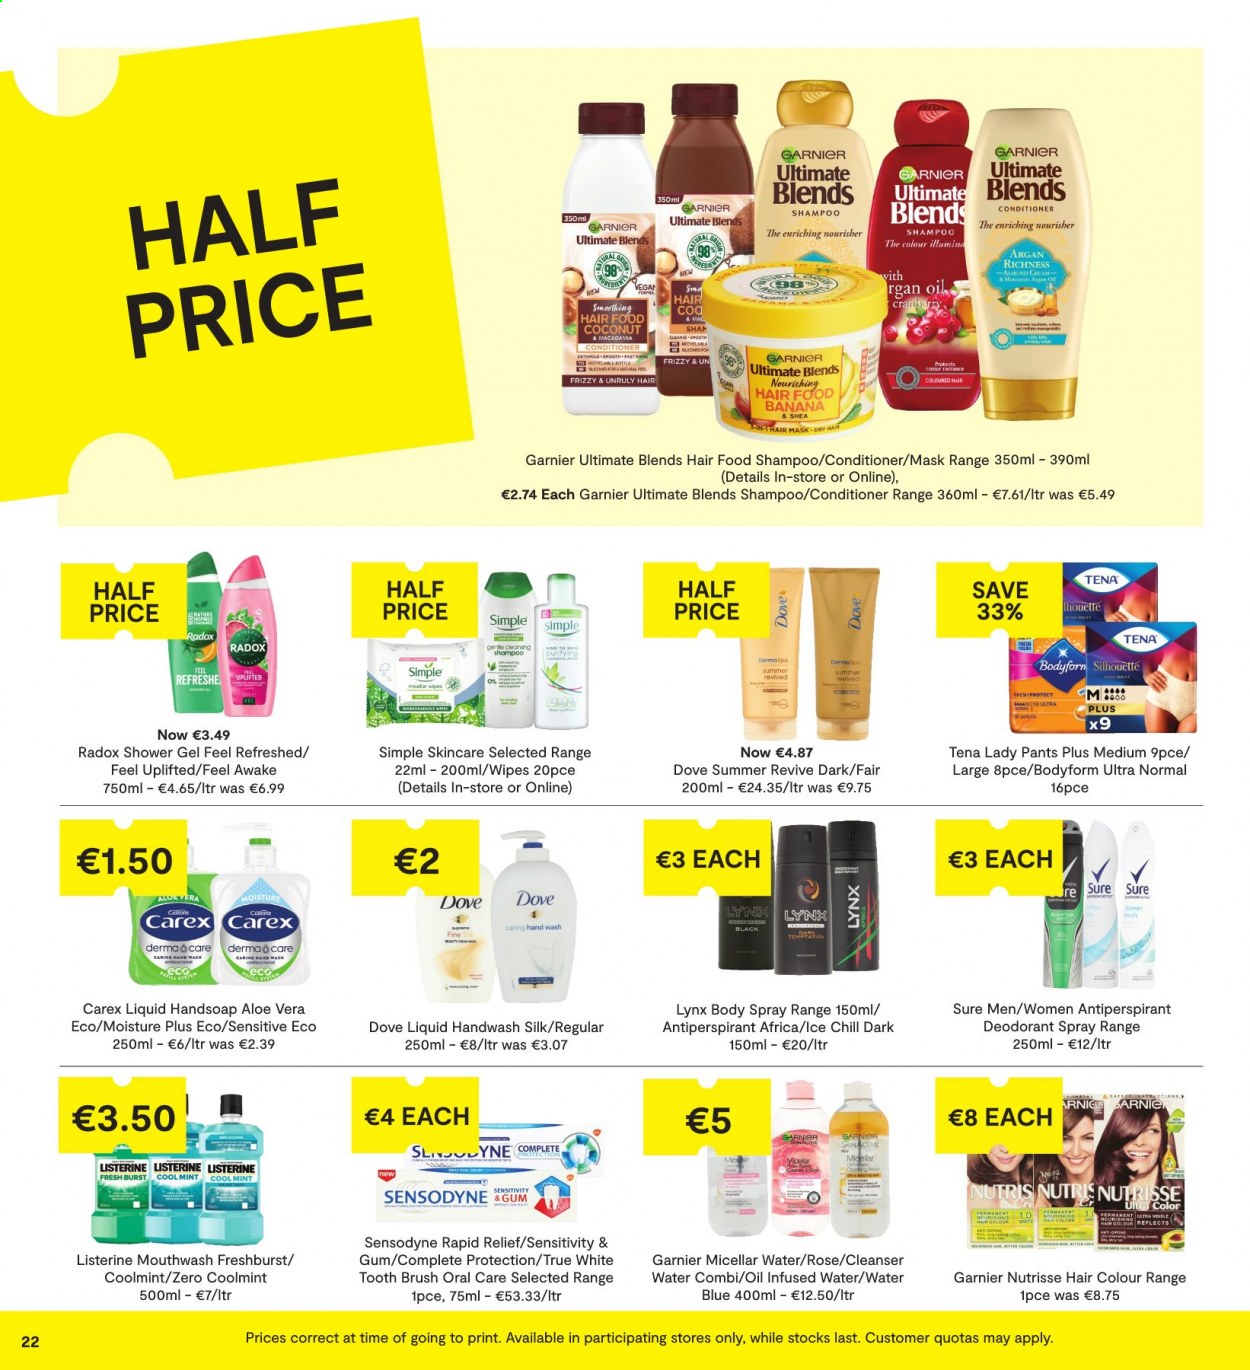 thumbnail - SuperValu offer  - 17.06.2021 - 30.06.2021 - Sales products - Silk, rosé wine, wipes, pants, Dove, shampoo, shower gel, hand wash, Radox, Carex, Listerine, toothbrush, Sensodyne, mouthwash, Tena Lady, cleanser, Garnier, micellar water, conditioner, hair color, body spray, anti-perspirant, Sure, deodorant, argan oil. Page 22.